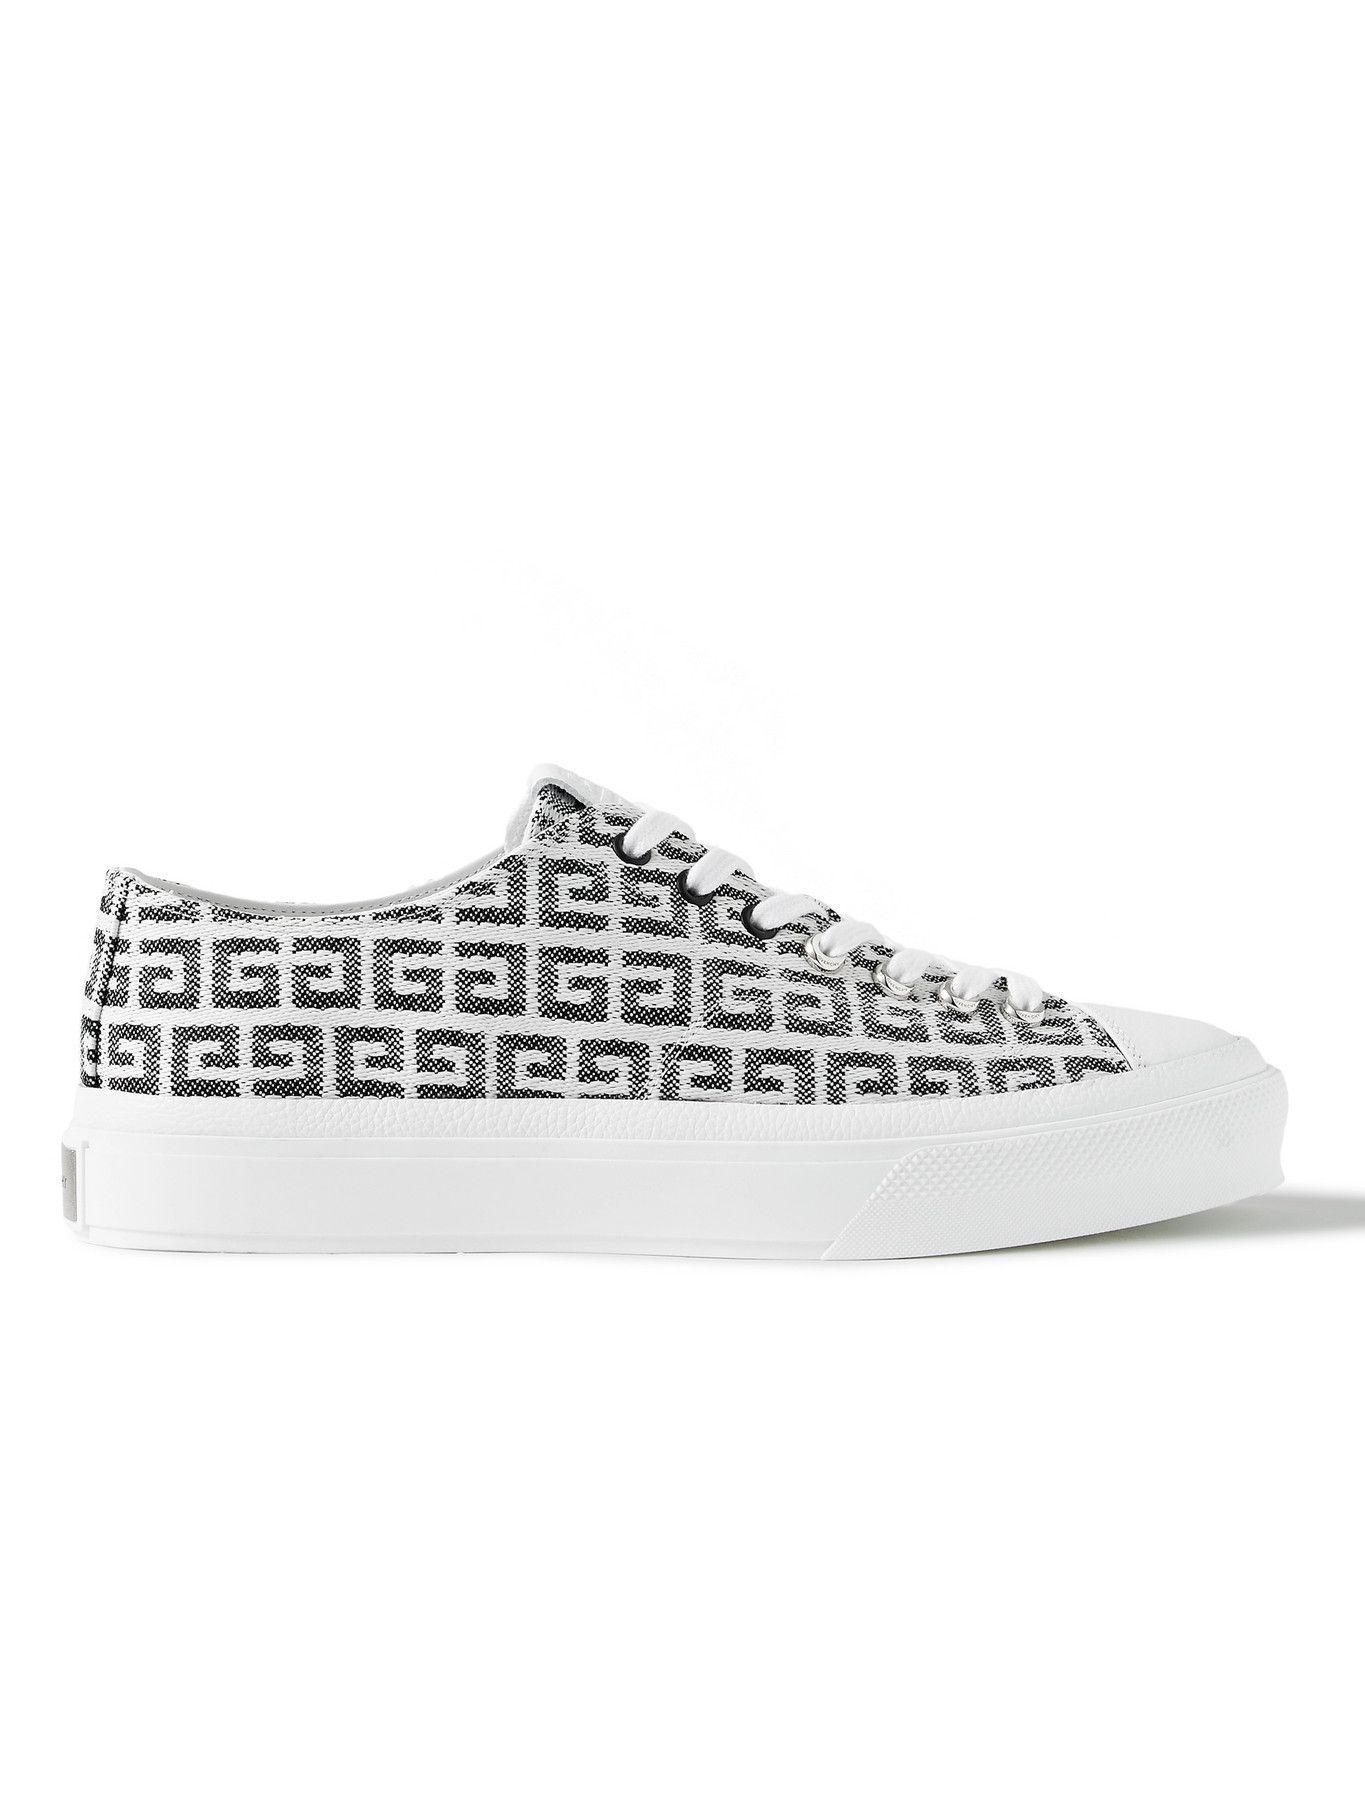 GIVENCHY - City Leather-Trimmed Logo-Jacquard Canvas Sneakers - Black ...